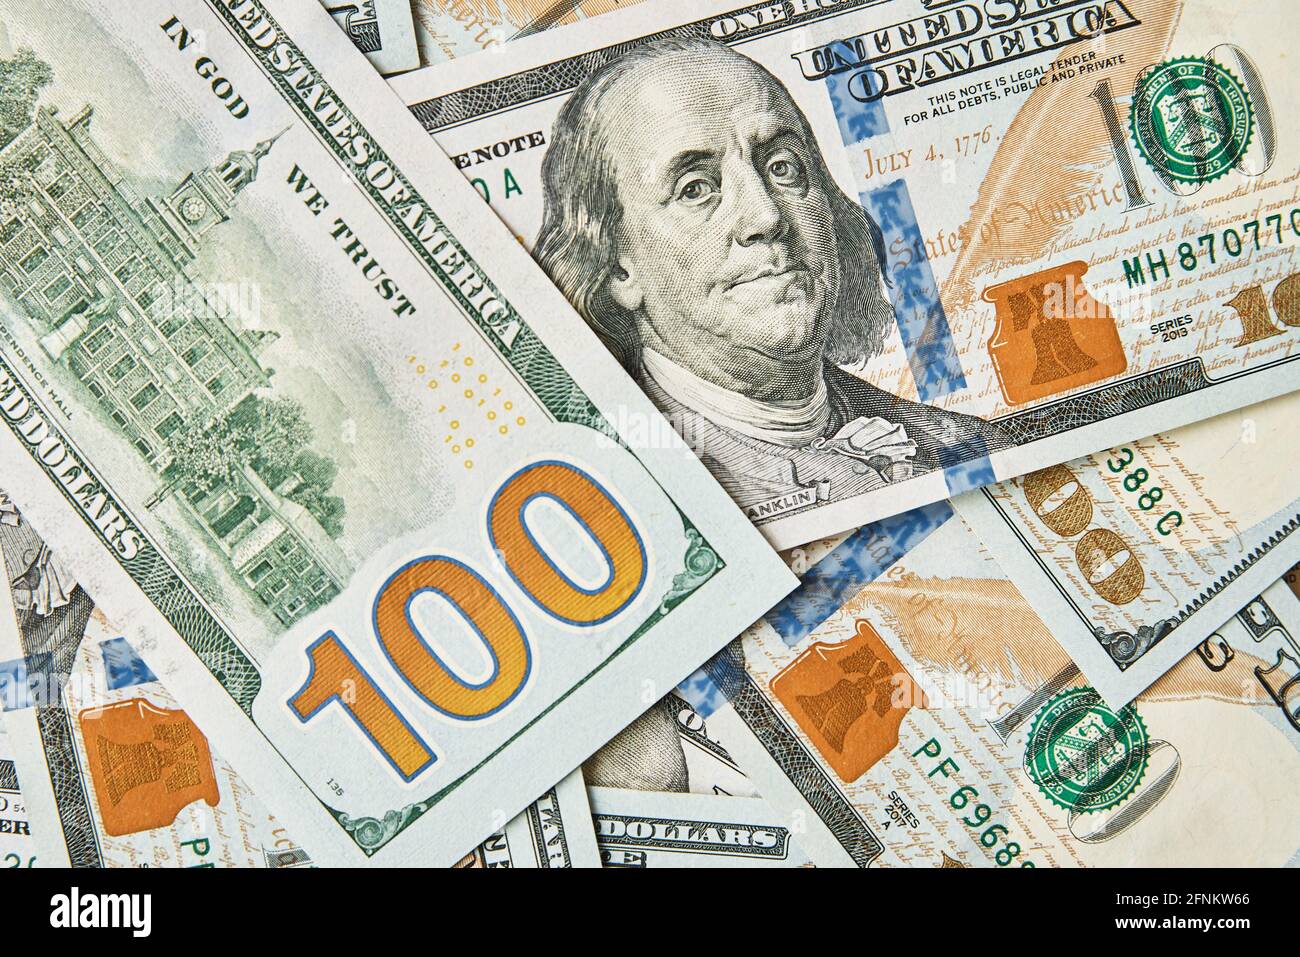 Dollar bills background. Pile of american money cash. One hundred usd dollars banknotes. Stock Photo